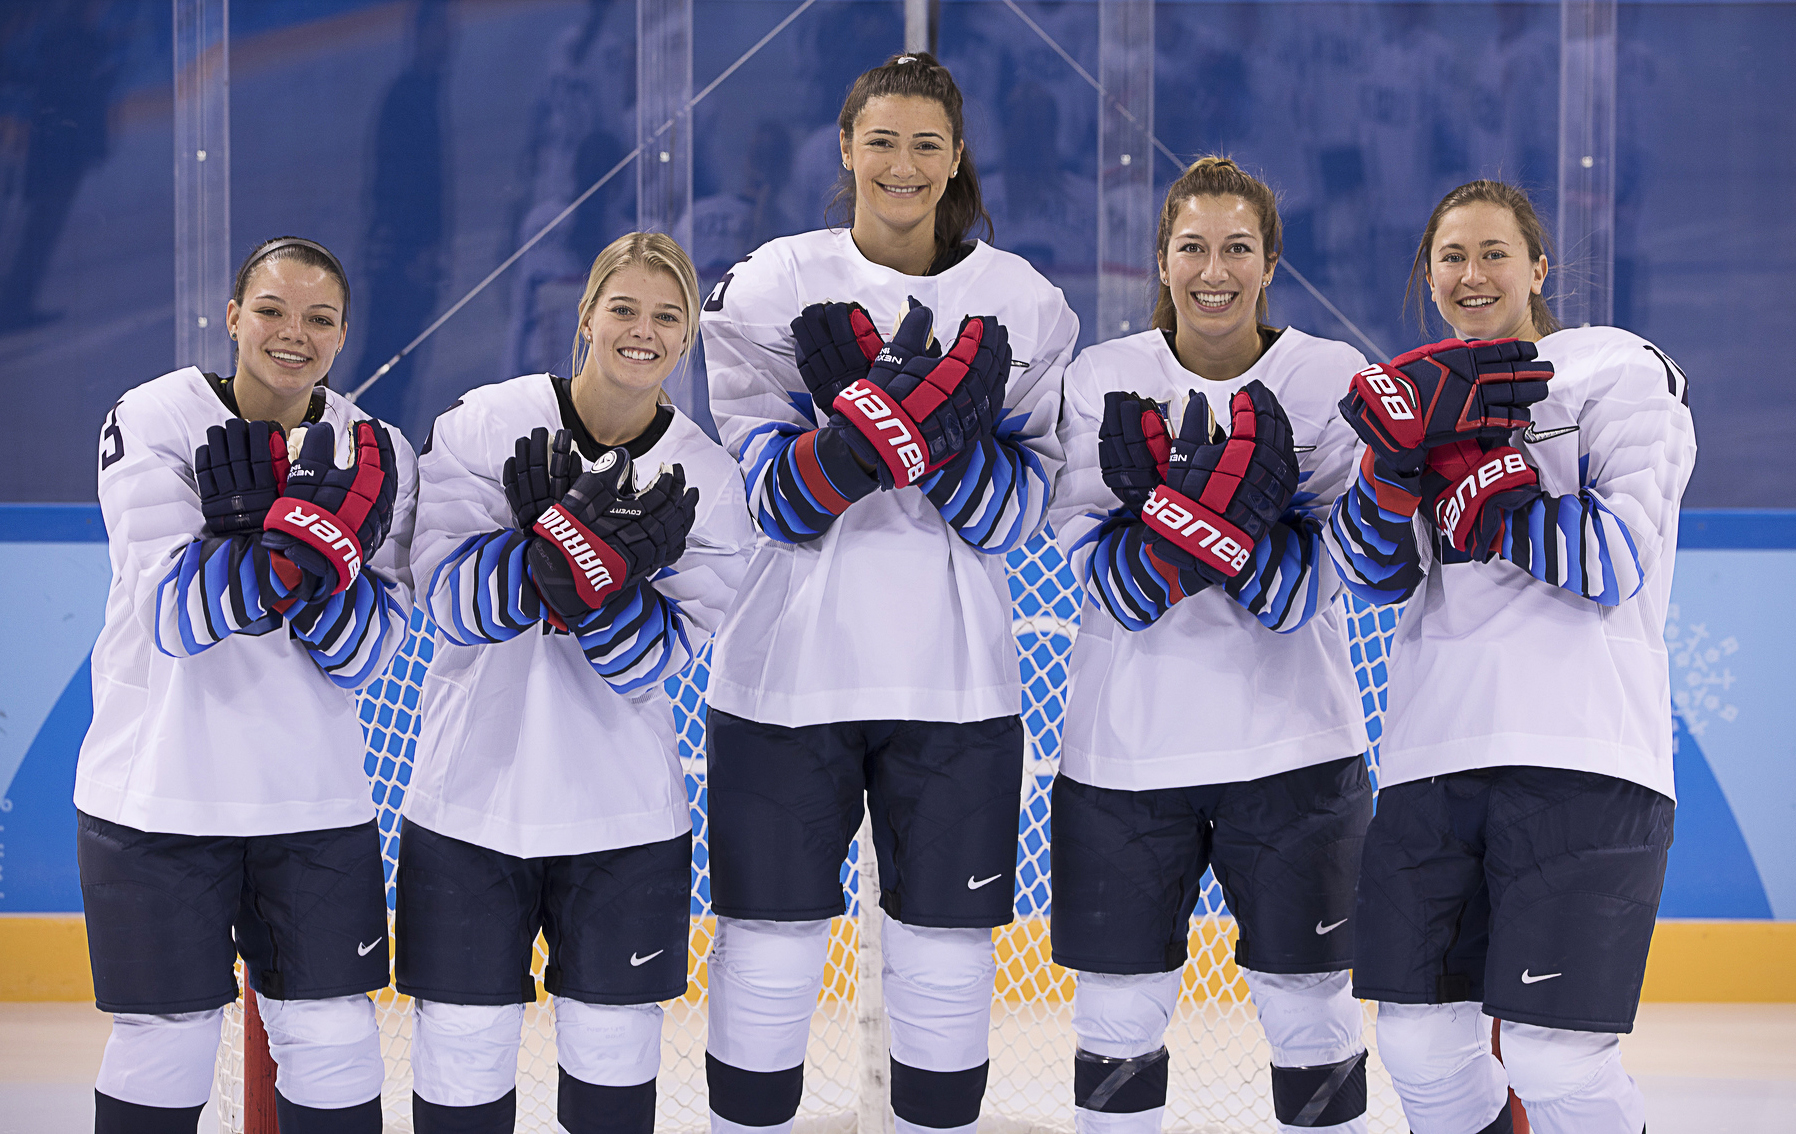 Cayla Barnes Of Team Usas Womens Hockey Team Shares Her Experience At